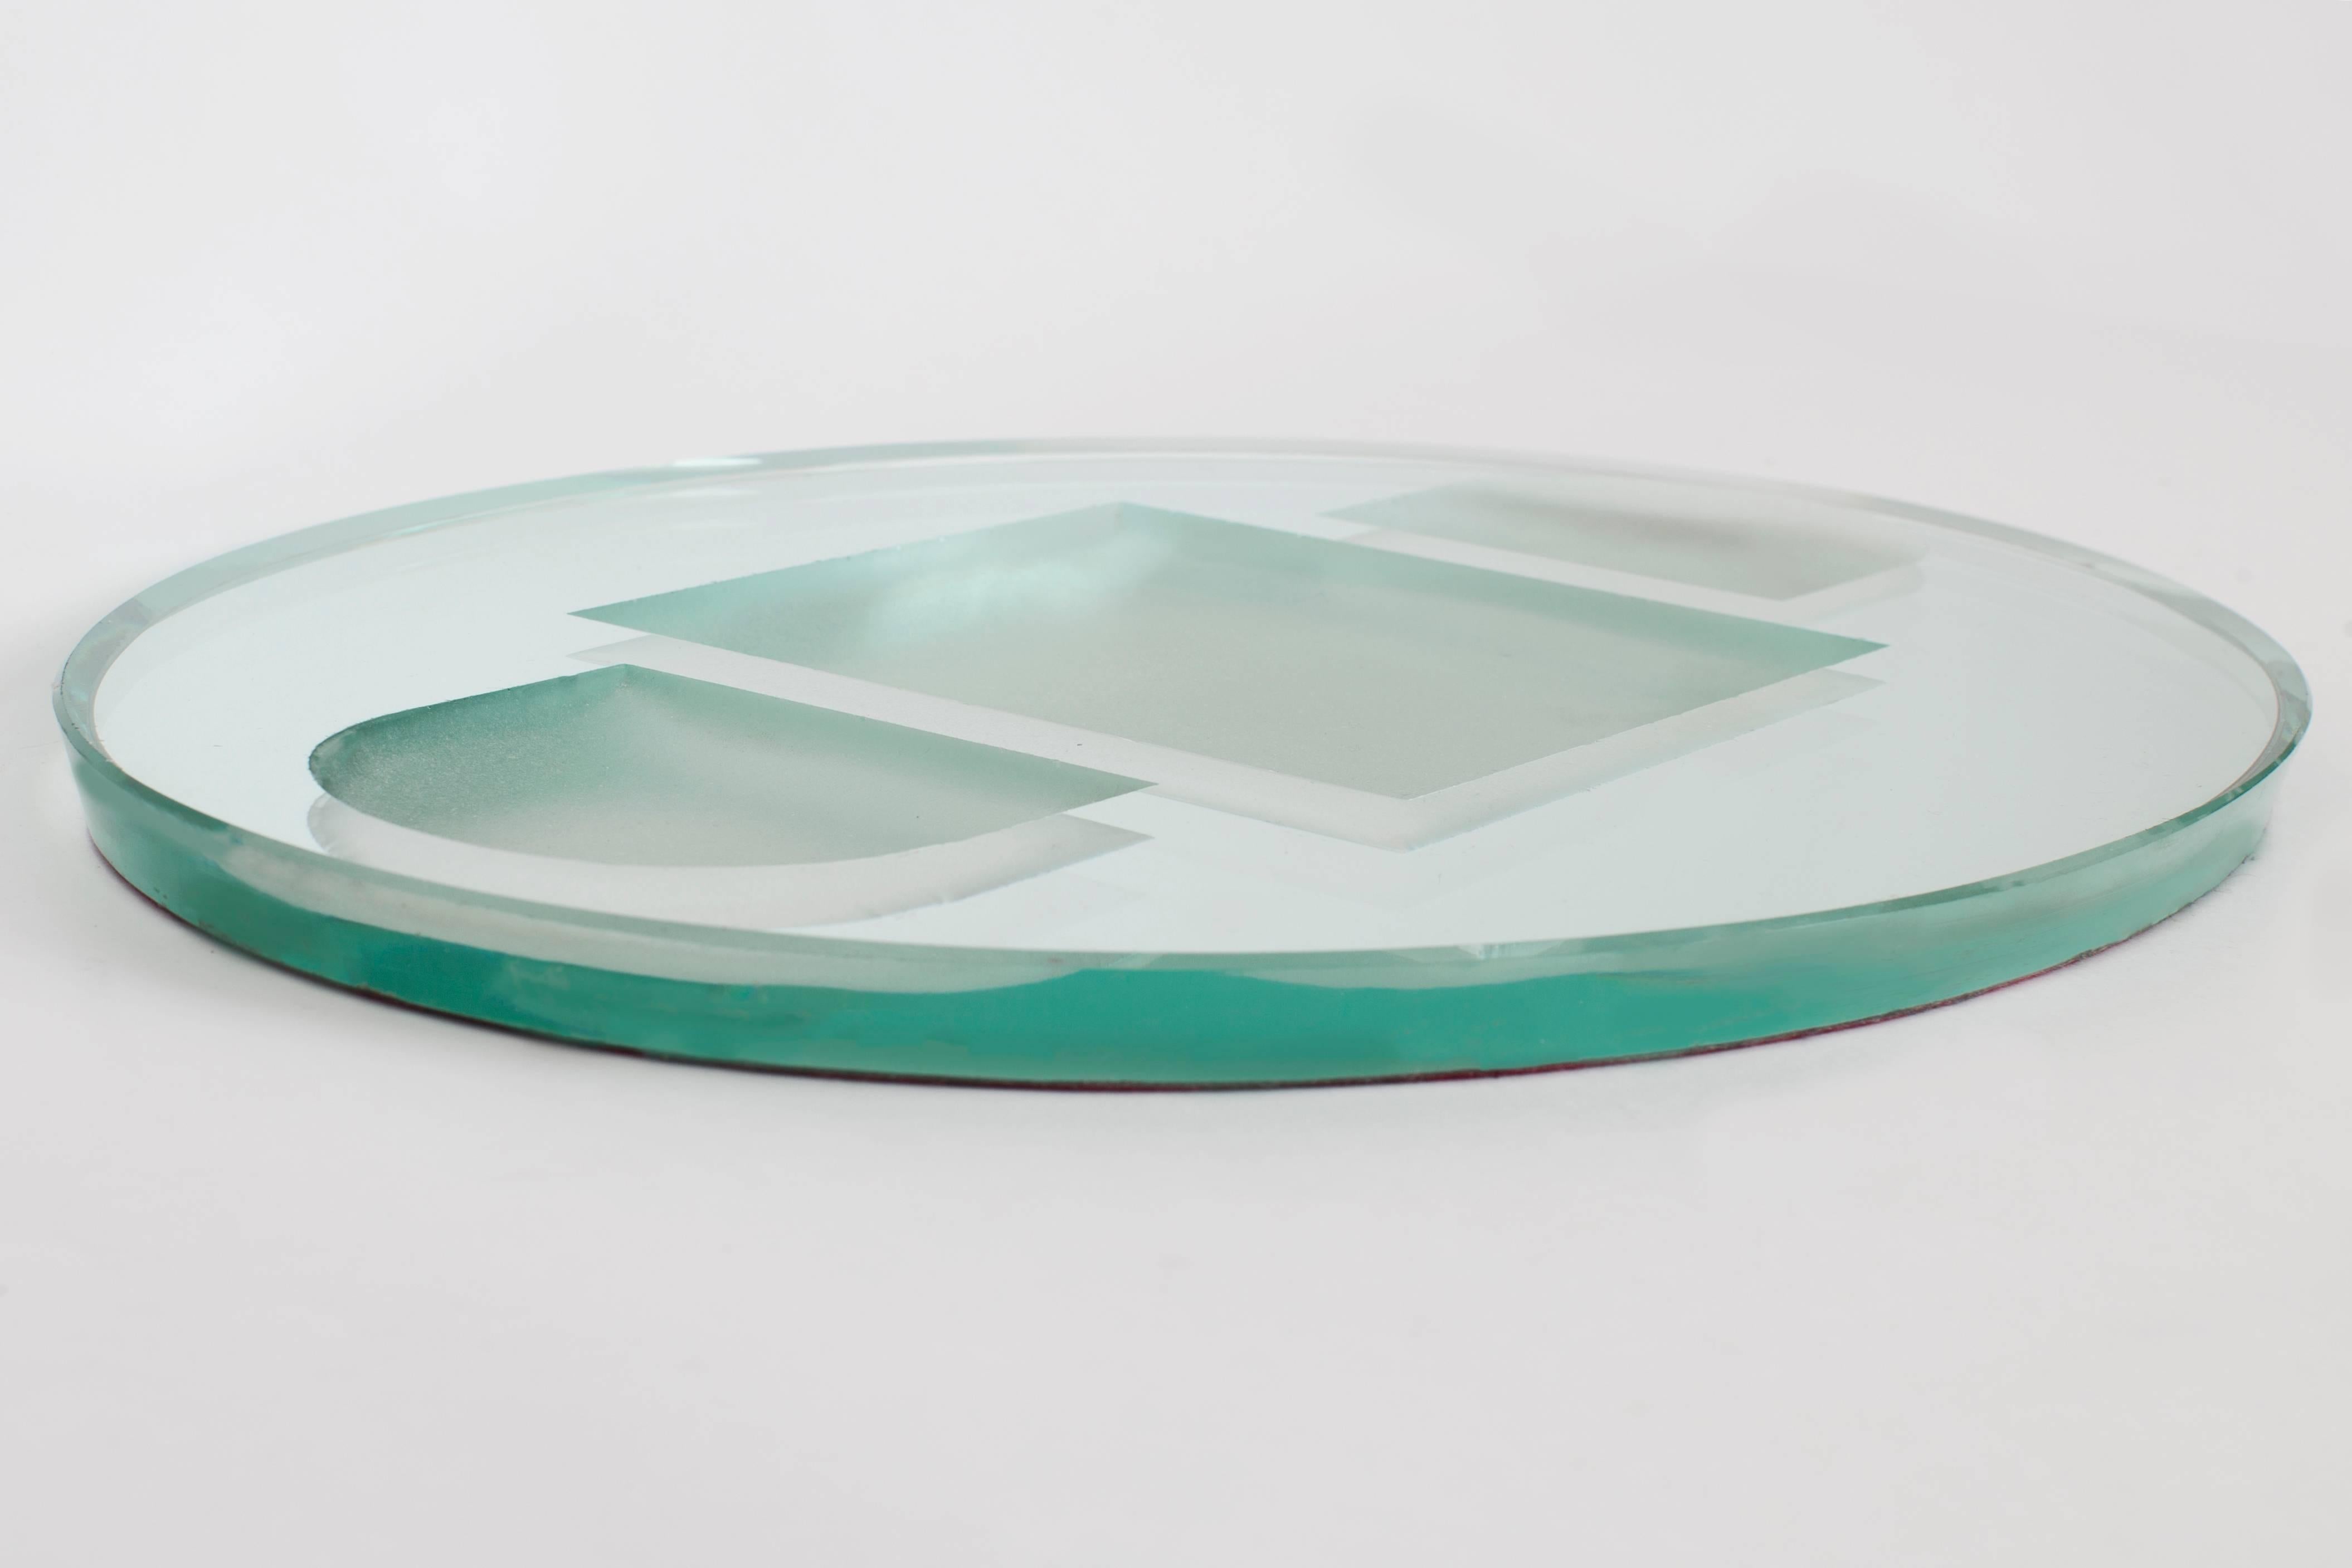 France, 1950's

A thick, modernist oval tray or vide-poche, in mirrored glass and frosted glass, with sand-blasted geometric motif in deep relief. In the purified Art Deco style of avant-garde glassware designer Jean Luce, a collaborator of Jean